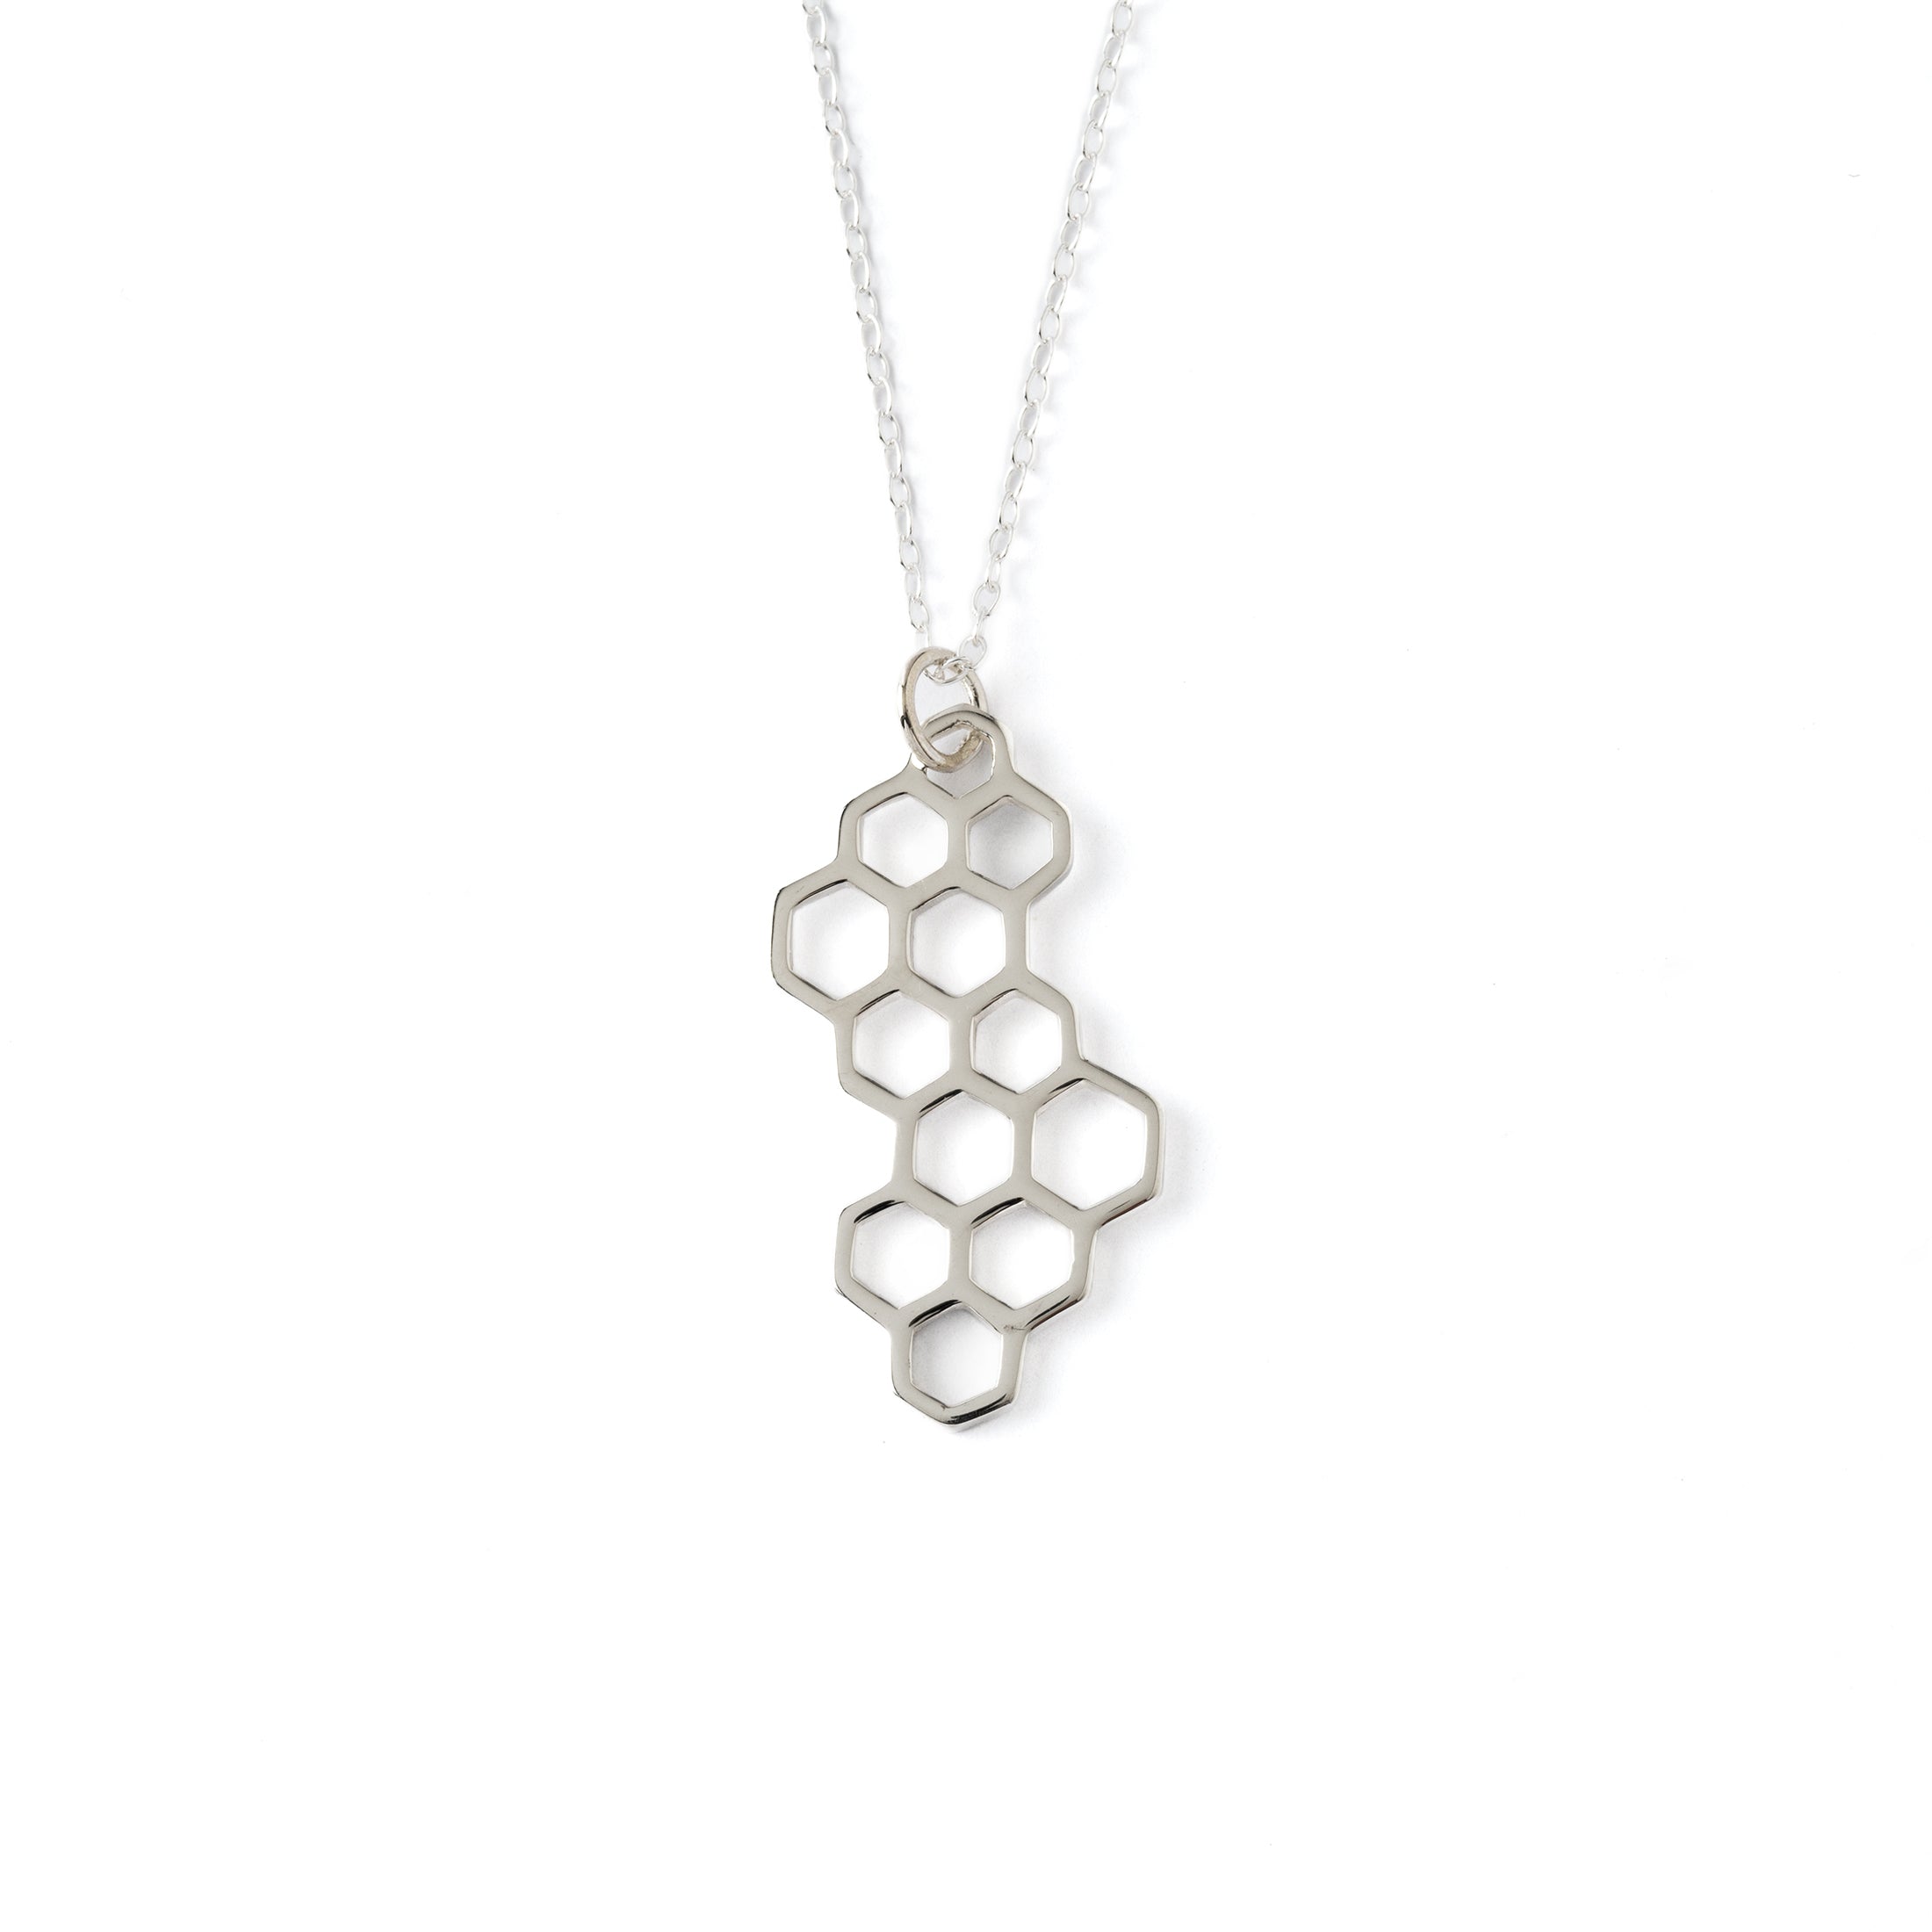 Honeycomb silver pendant necklace frontal view